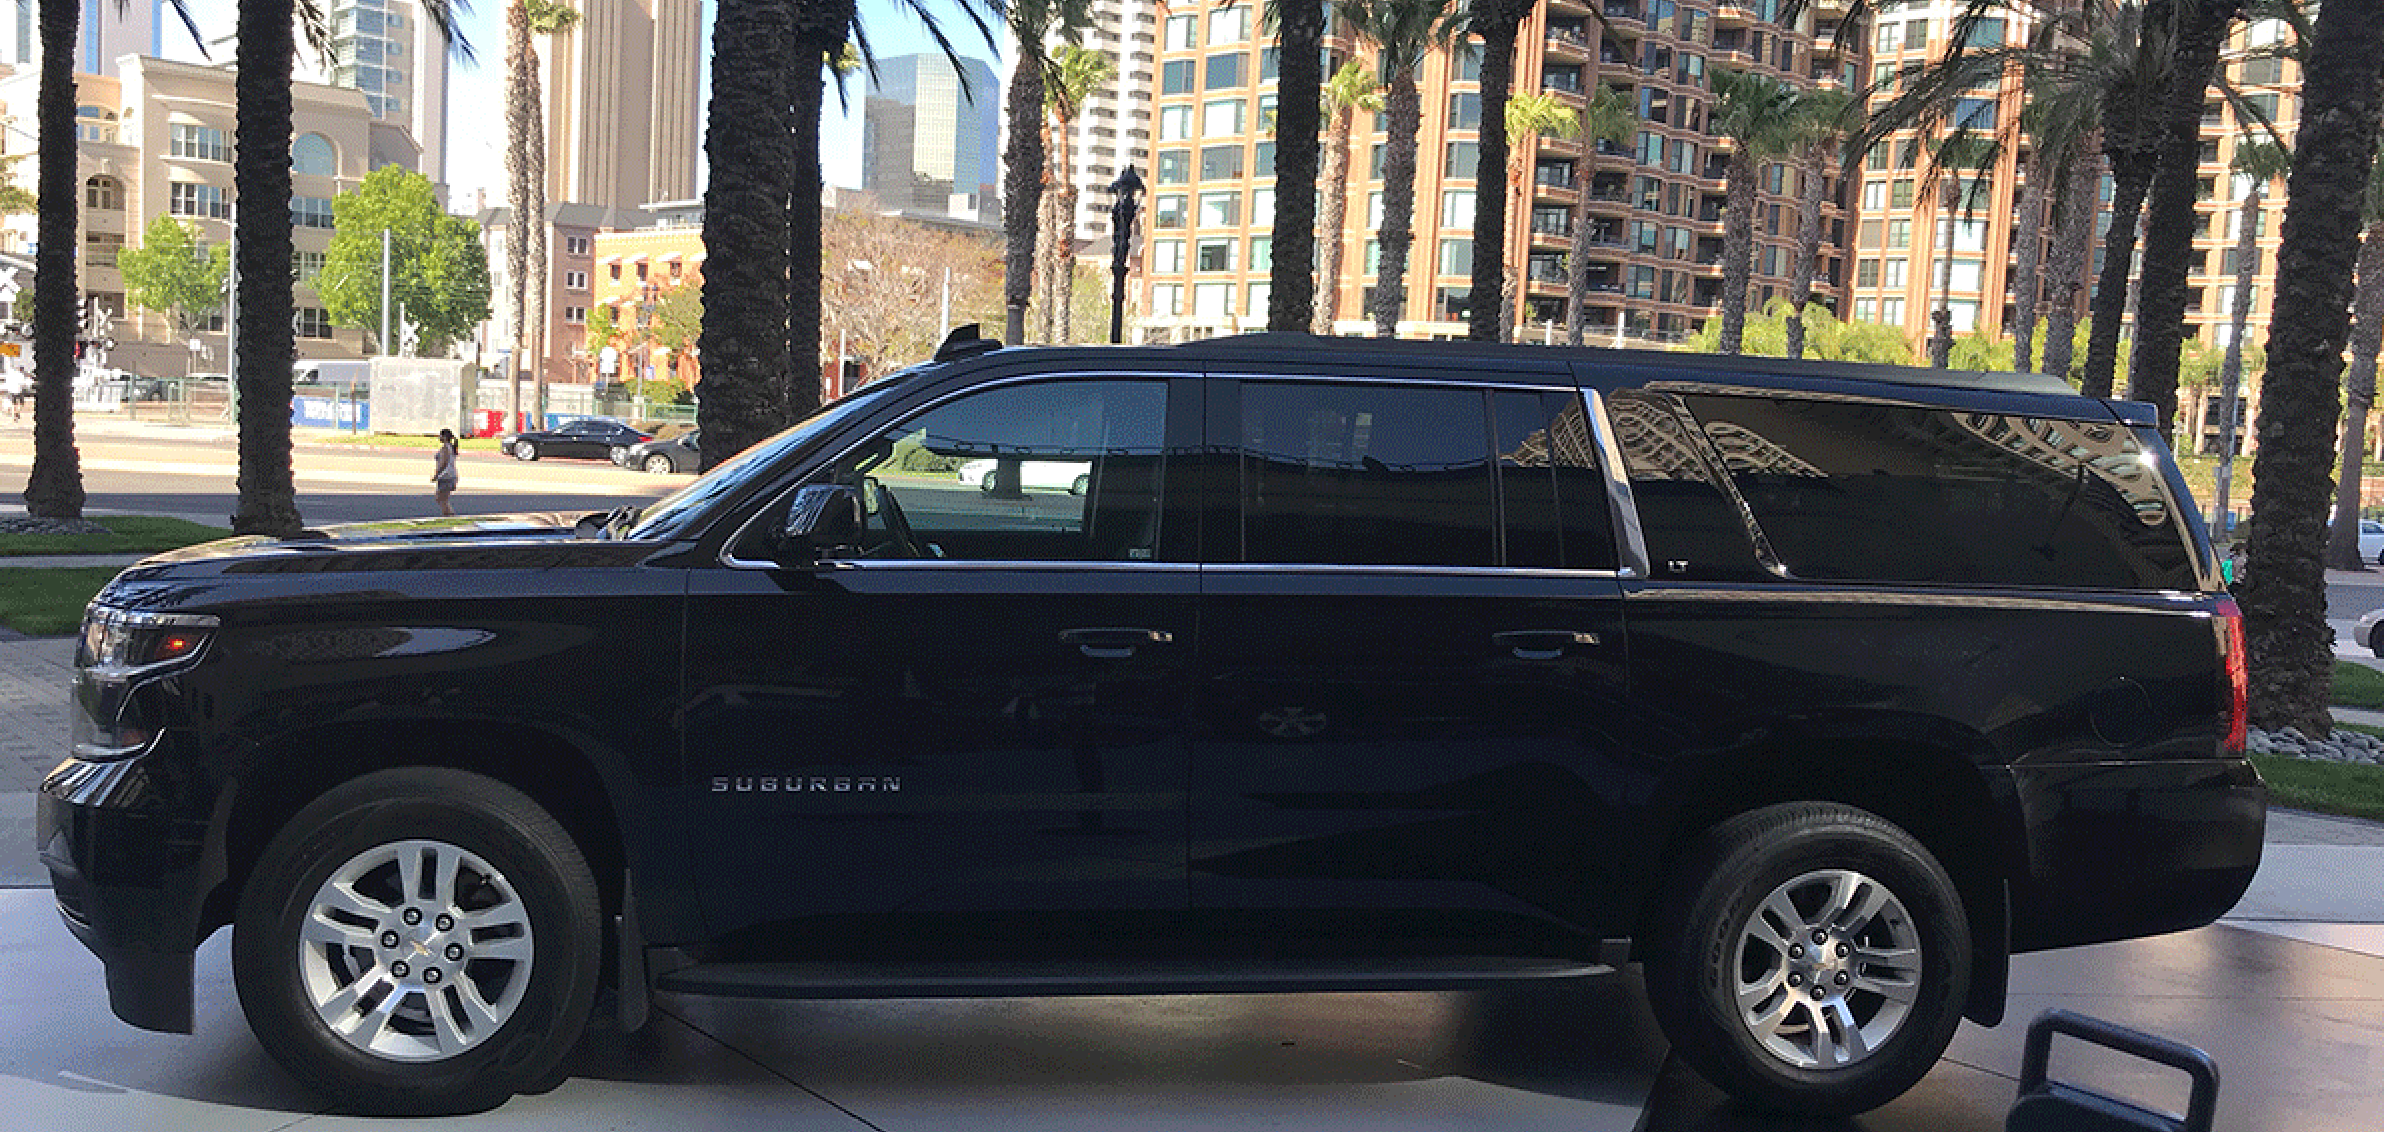 Suburban SUV at Captain Transportation for transfers to San Diego Airport, LAX and more